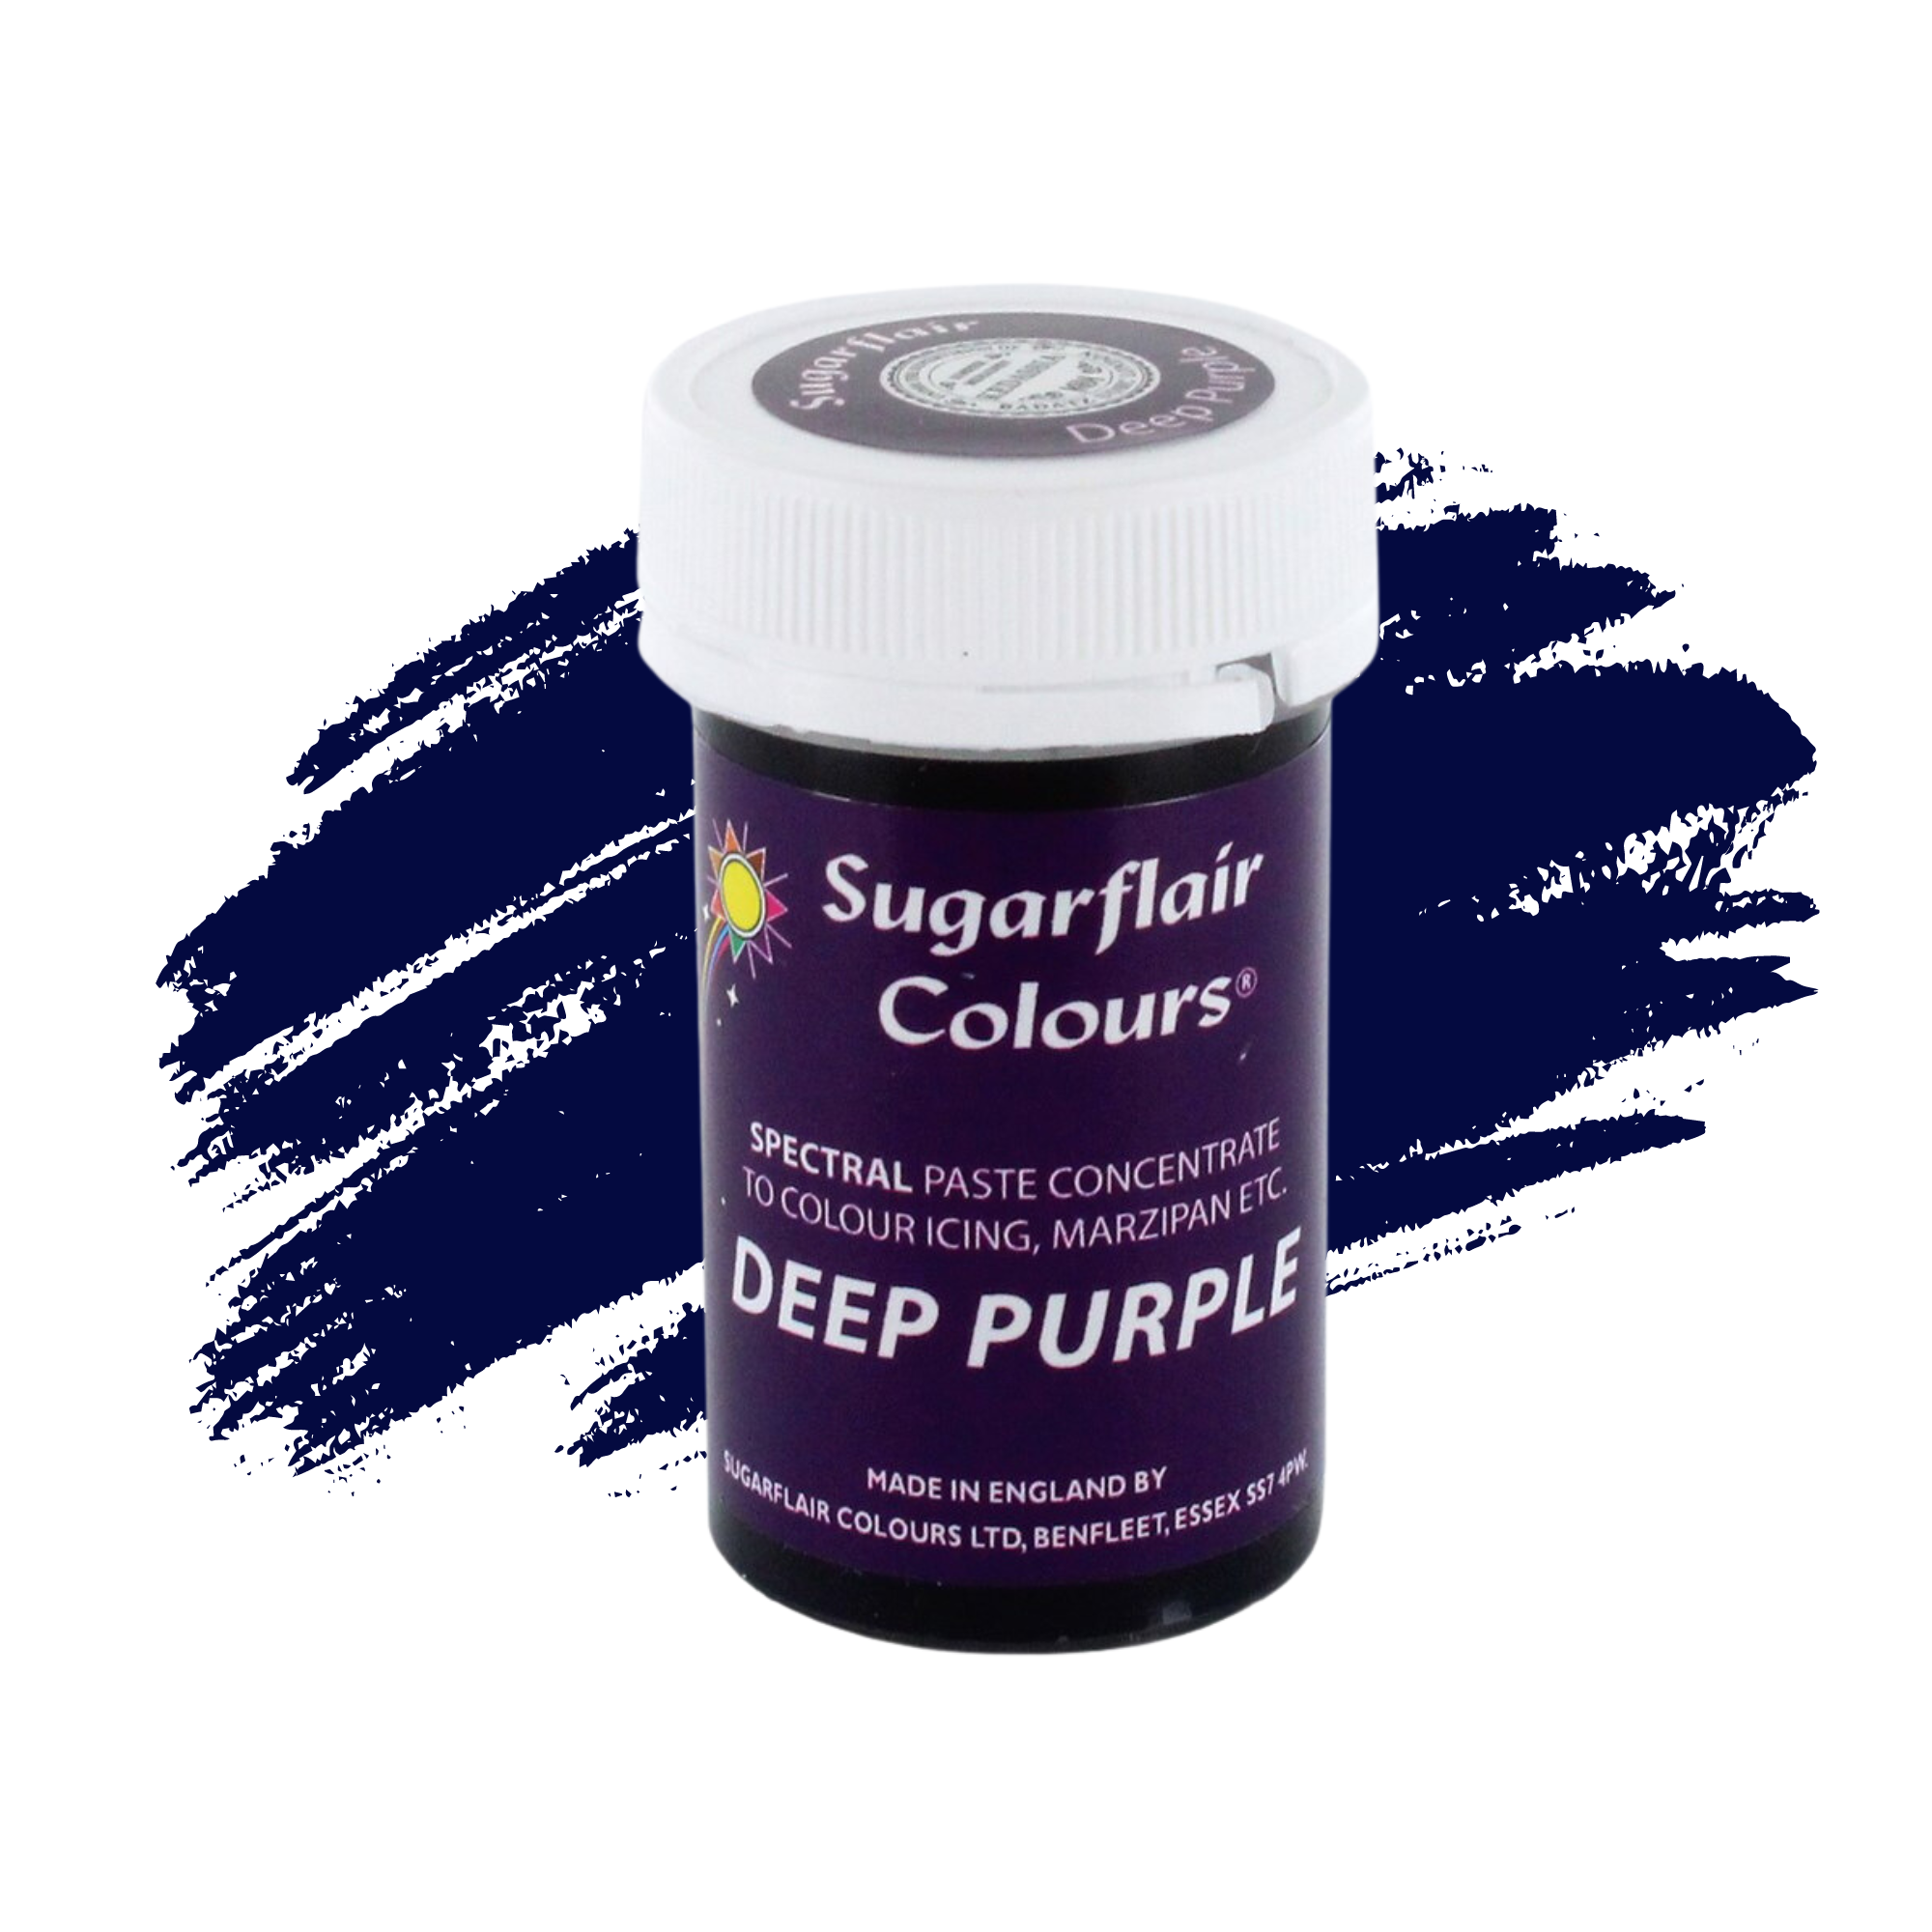 Sugarflair Paste Colours Concentrated Food Colouring - Spectral Deep Purple - 25g